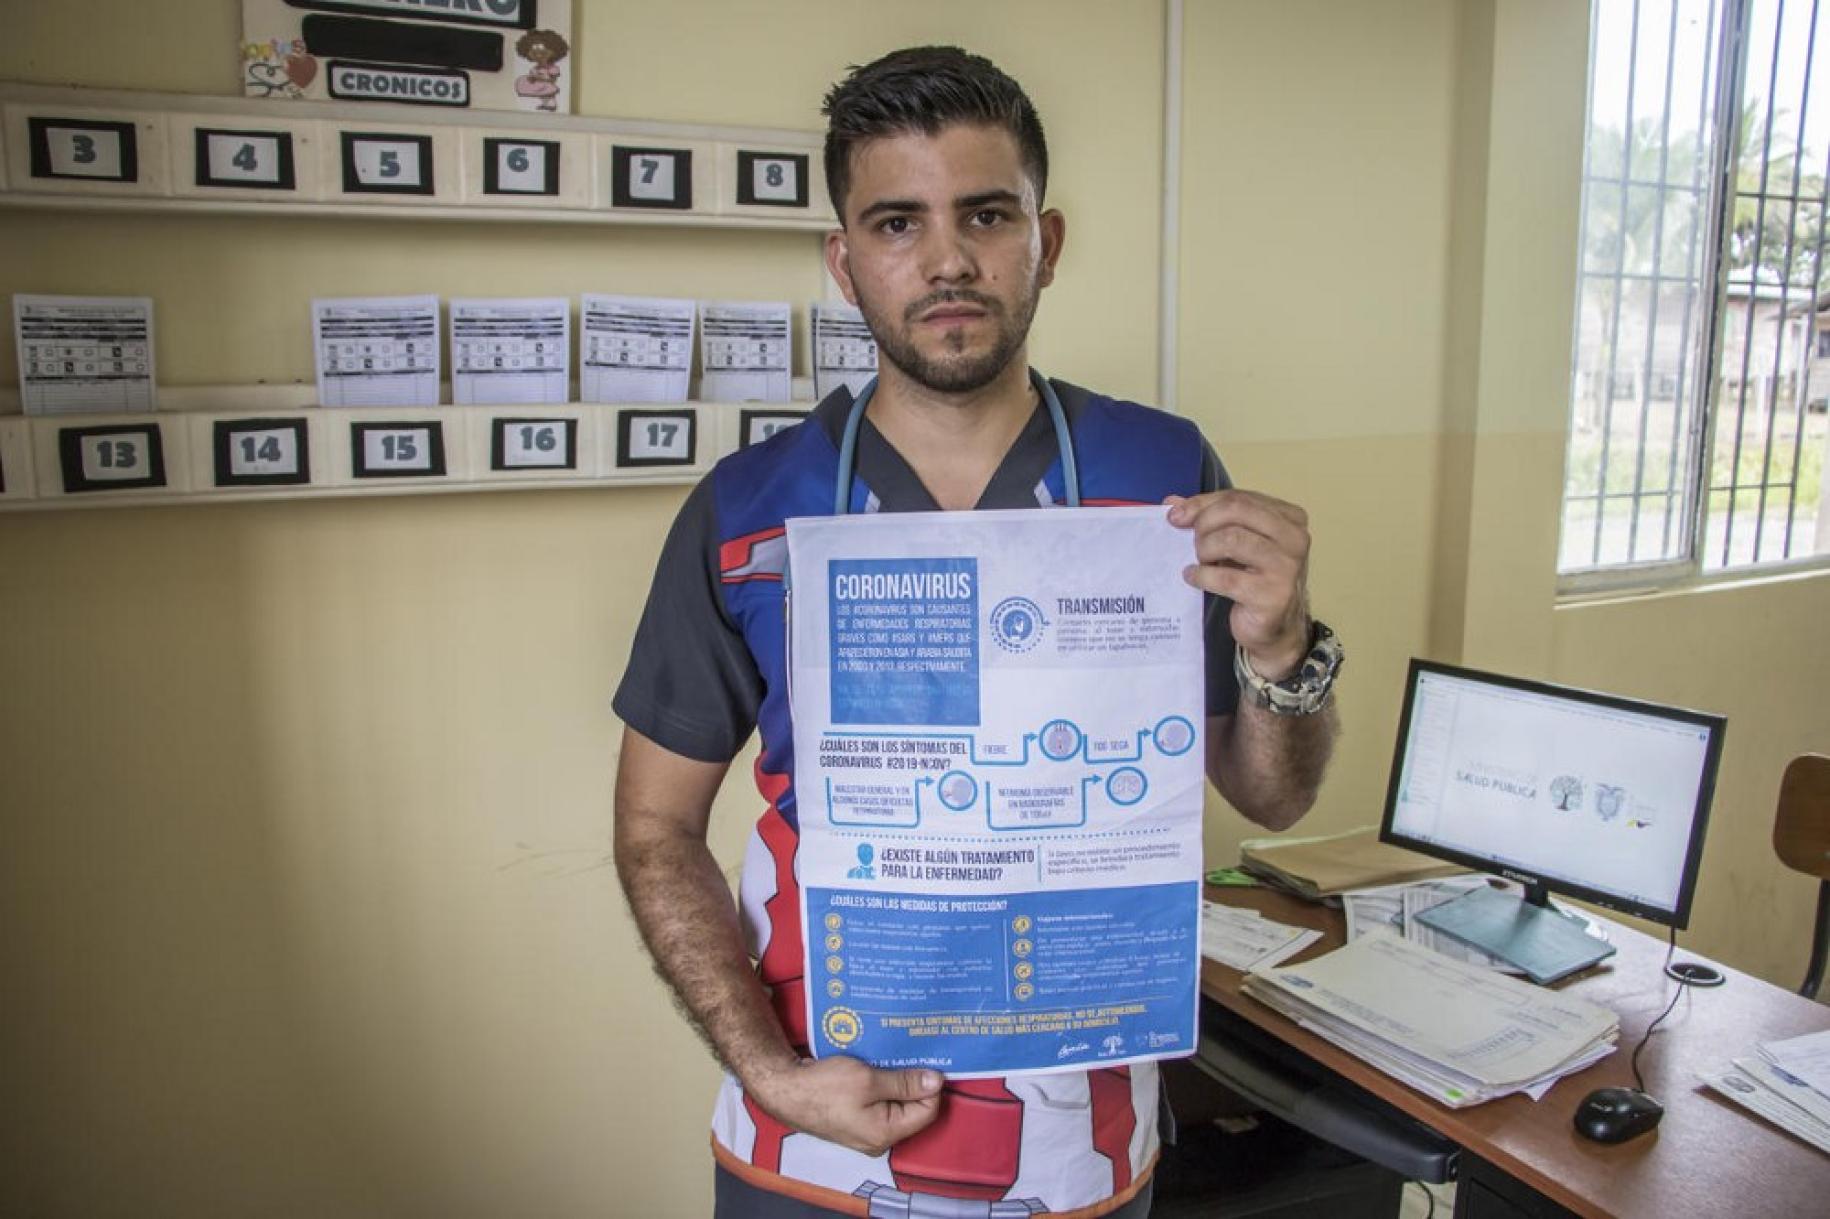 Venezuelan doctor, Samuel Suárez, has been educating locals and other refugees about COVID-19 in Ecuador, his adopted country.